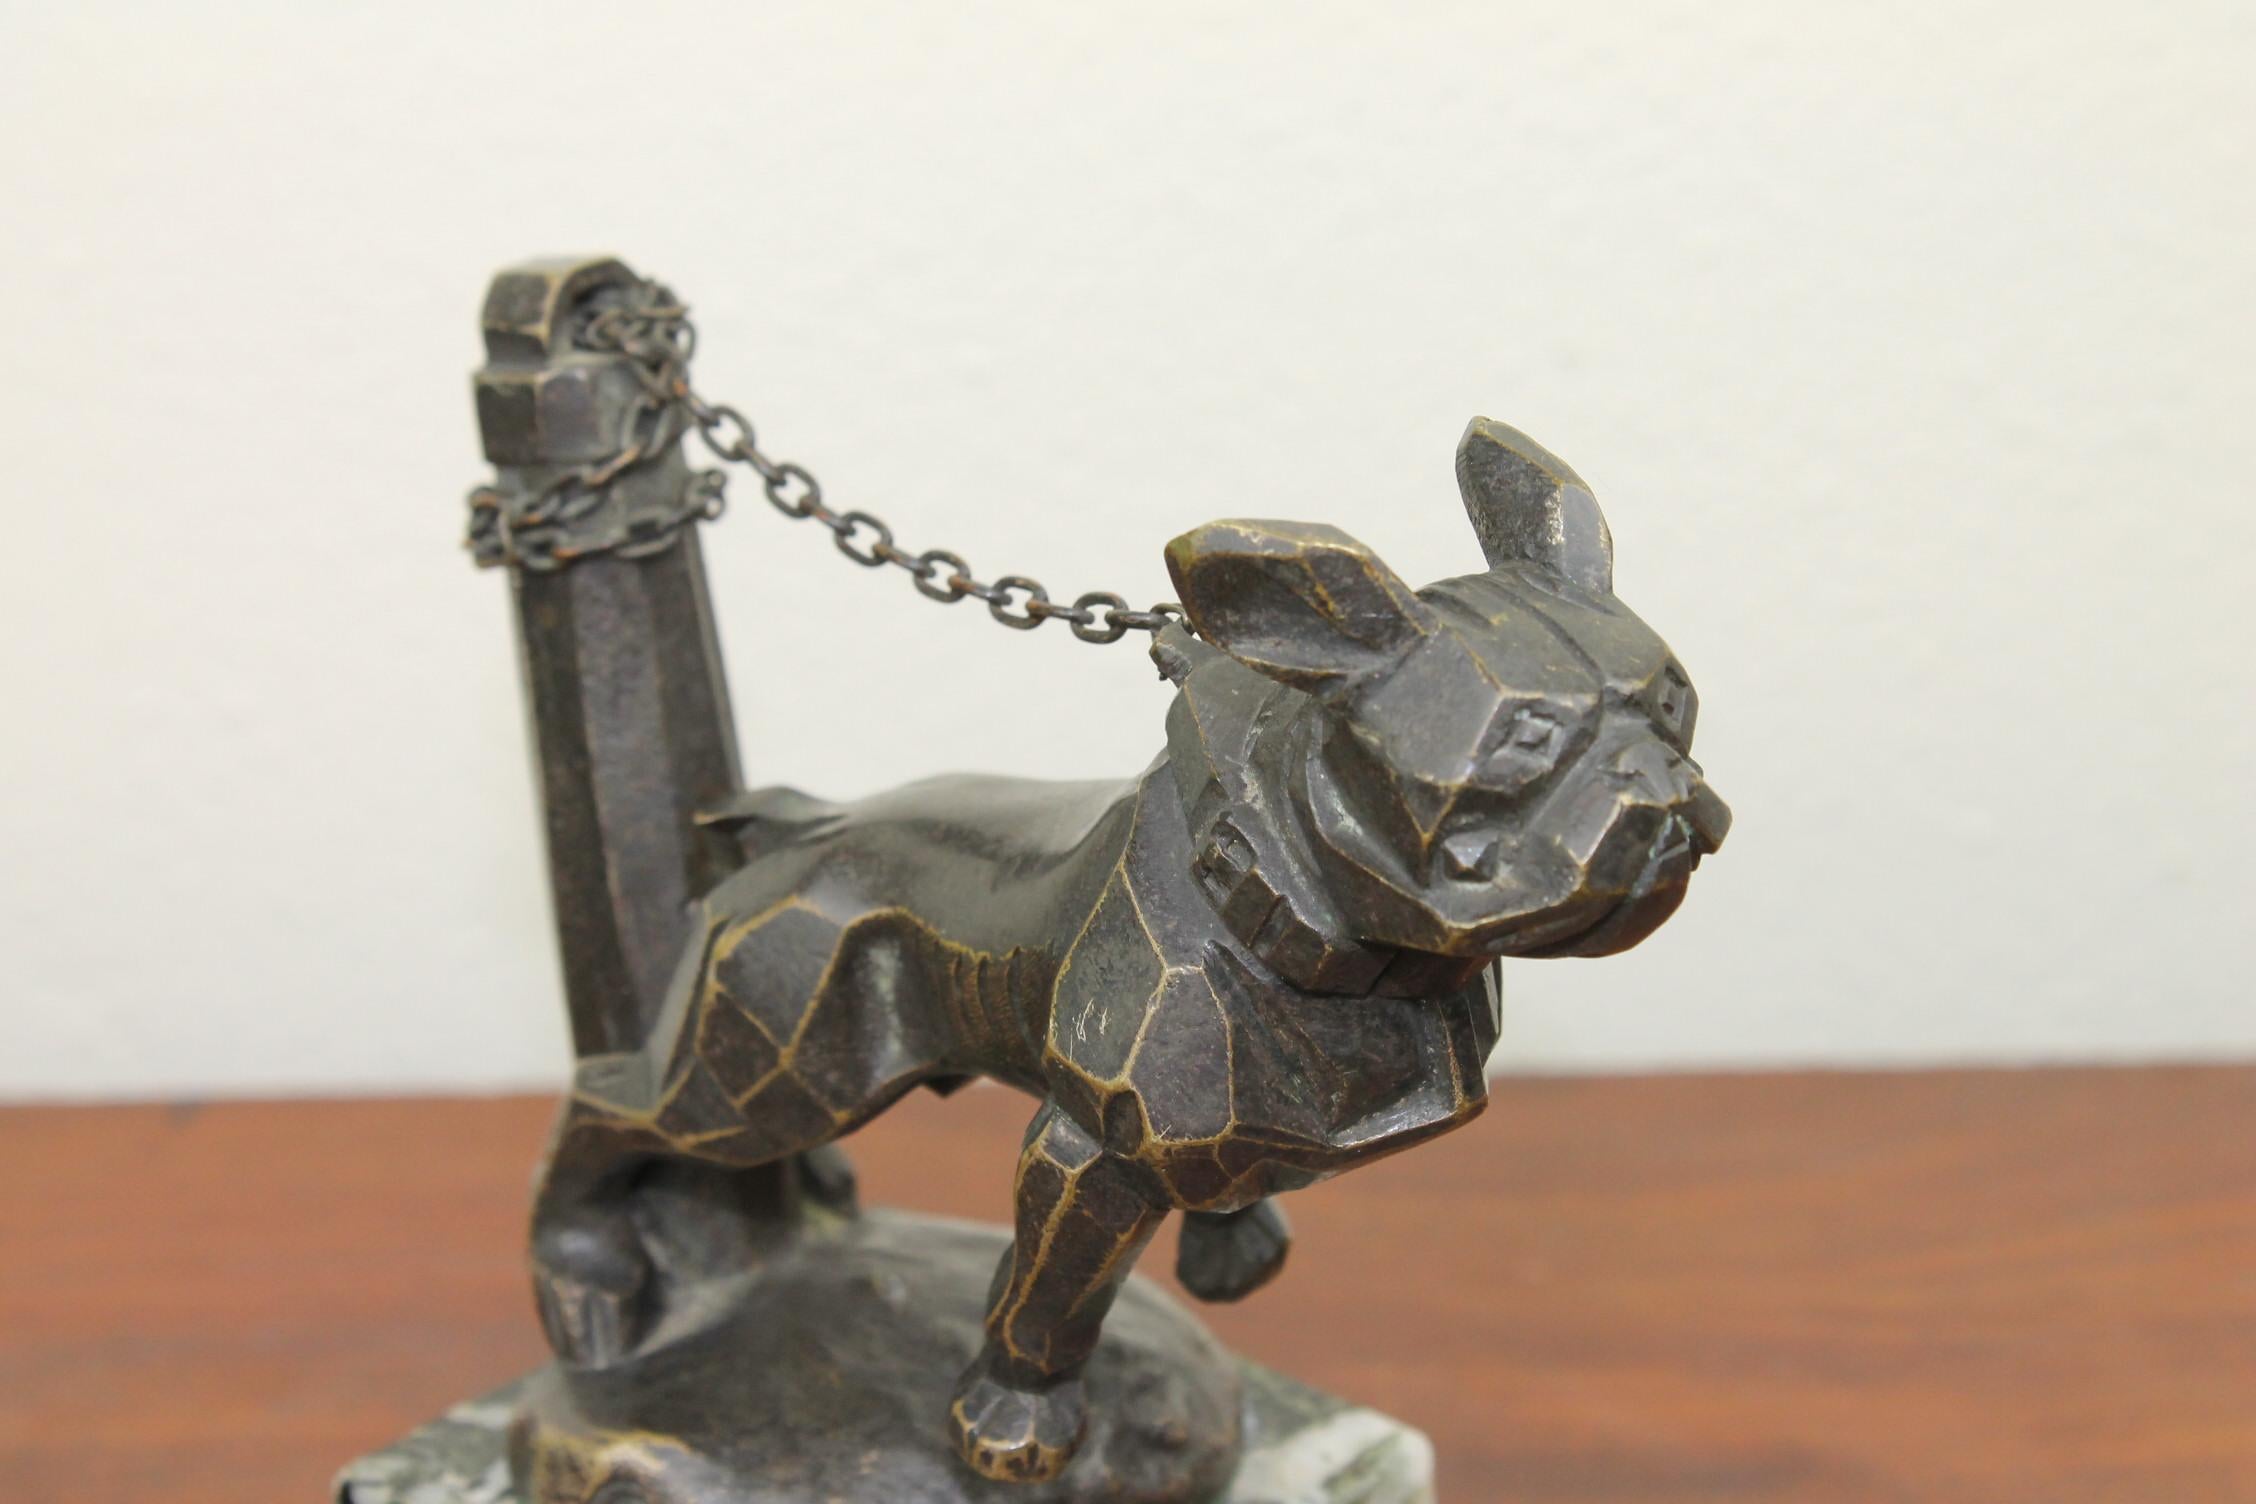 Unusual cubist hood ornament with French bulldog dog on the chain -
mounted on dark green , black and white veined Marble Base - Early 20th Century - 1920s - Art Deco Figurine - Art Nouveau Figurine . 
Art Deco Statue - Mascot - Radiator Cab -